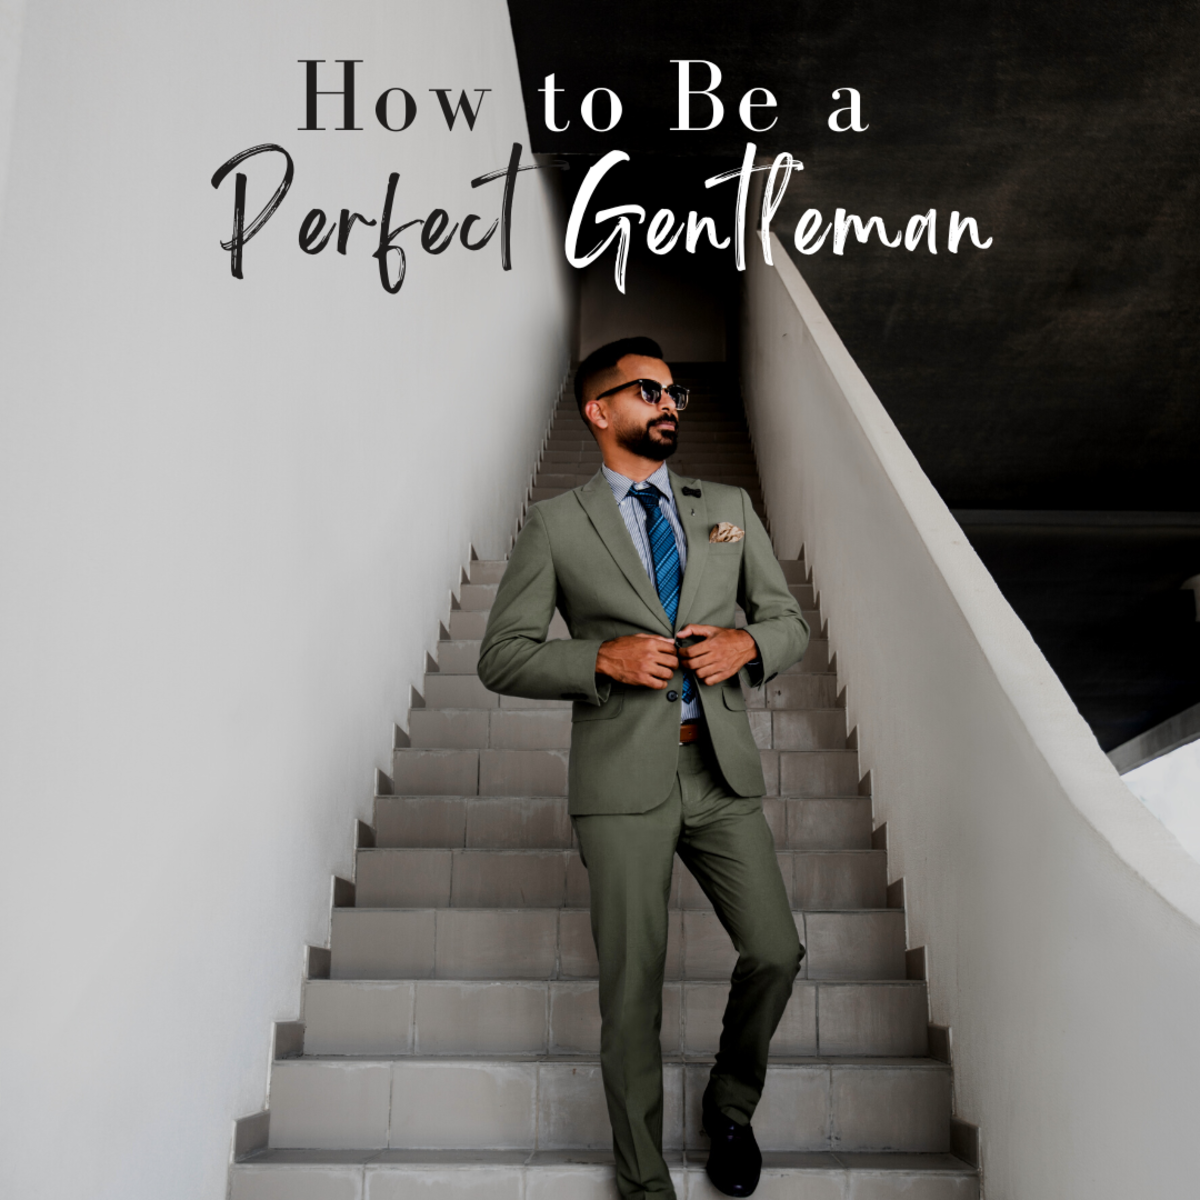 How to Behave and Look Like the Perfect Gentleman on a Date